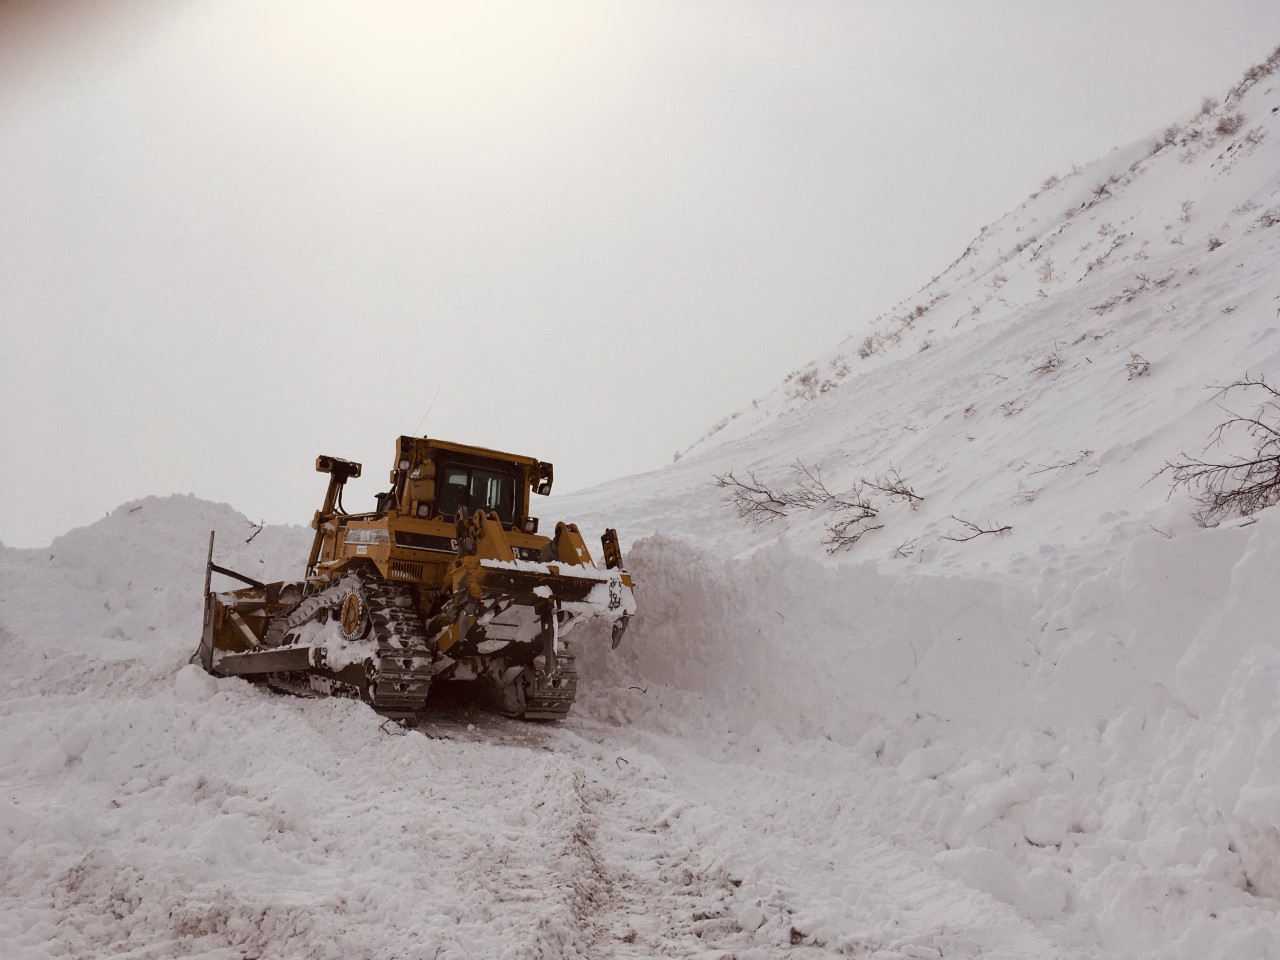 snowy mountain landscape with machinery working to plow a road